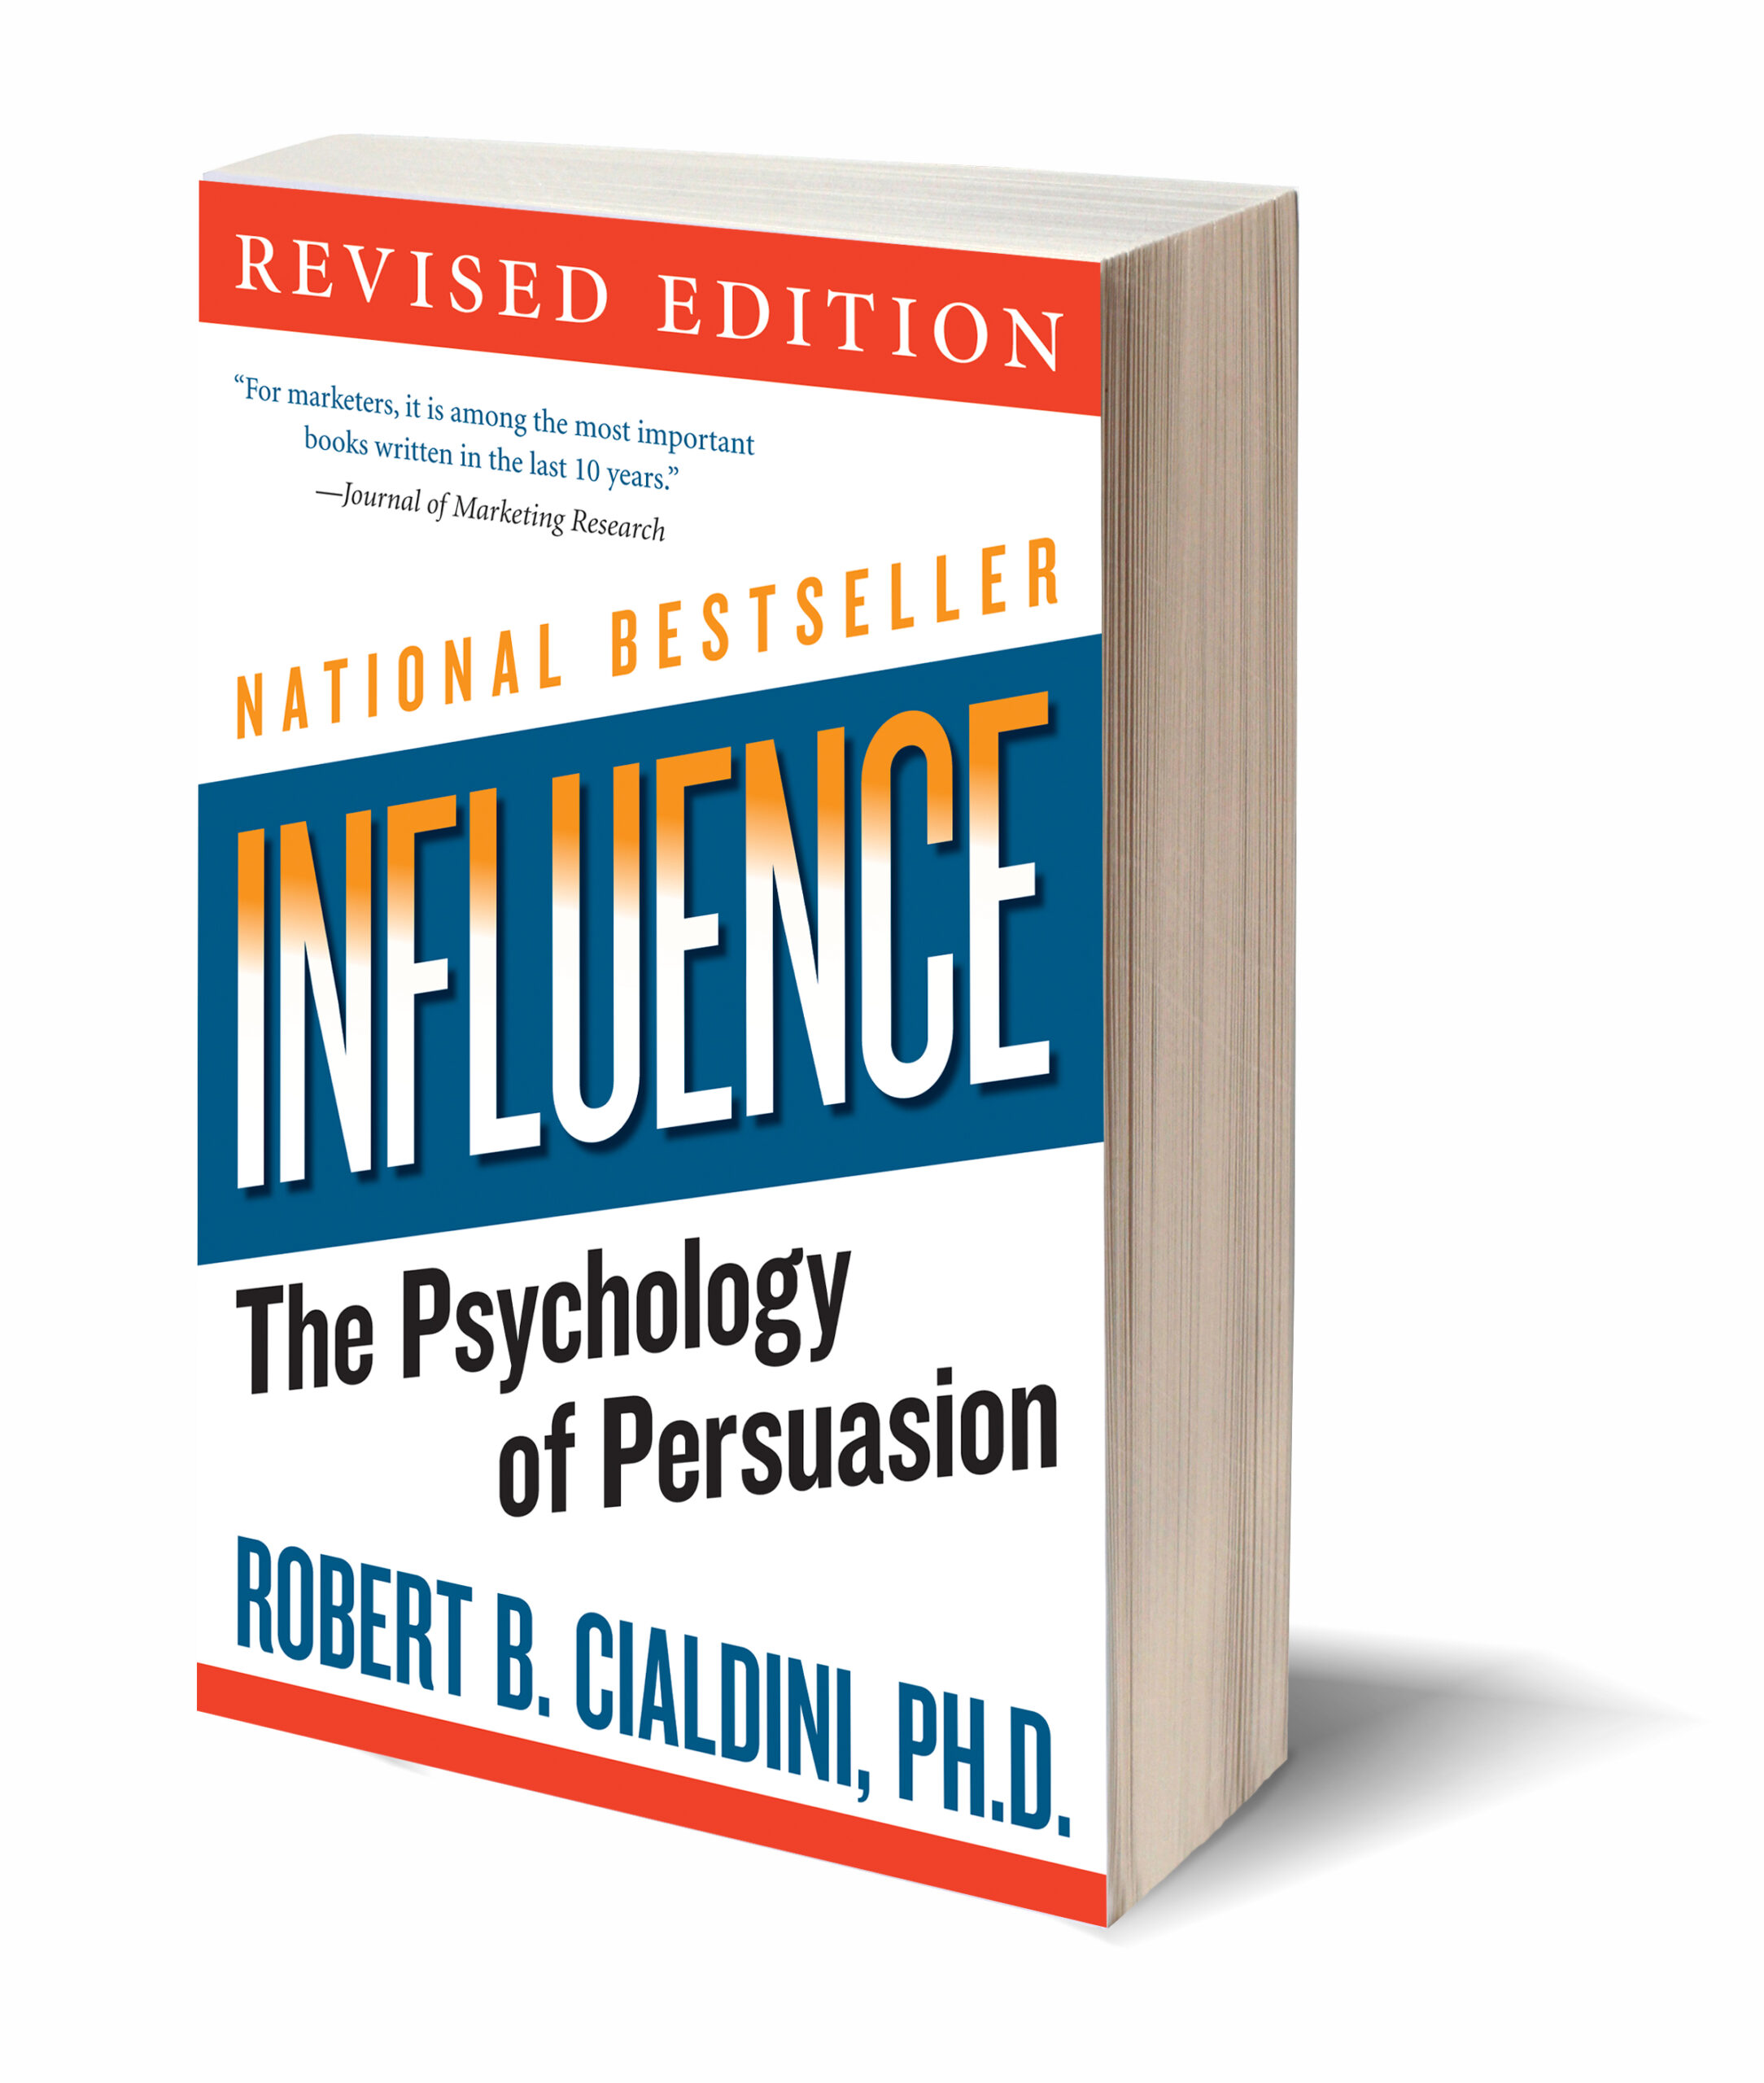 Holiday Read: Laws of Influence, the Psychology of Persuasion by Robert B. Cialdini